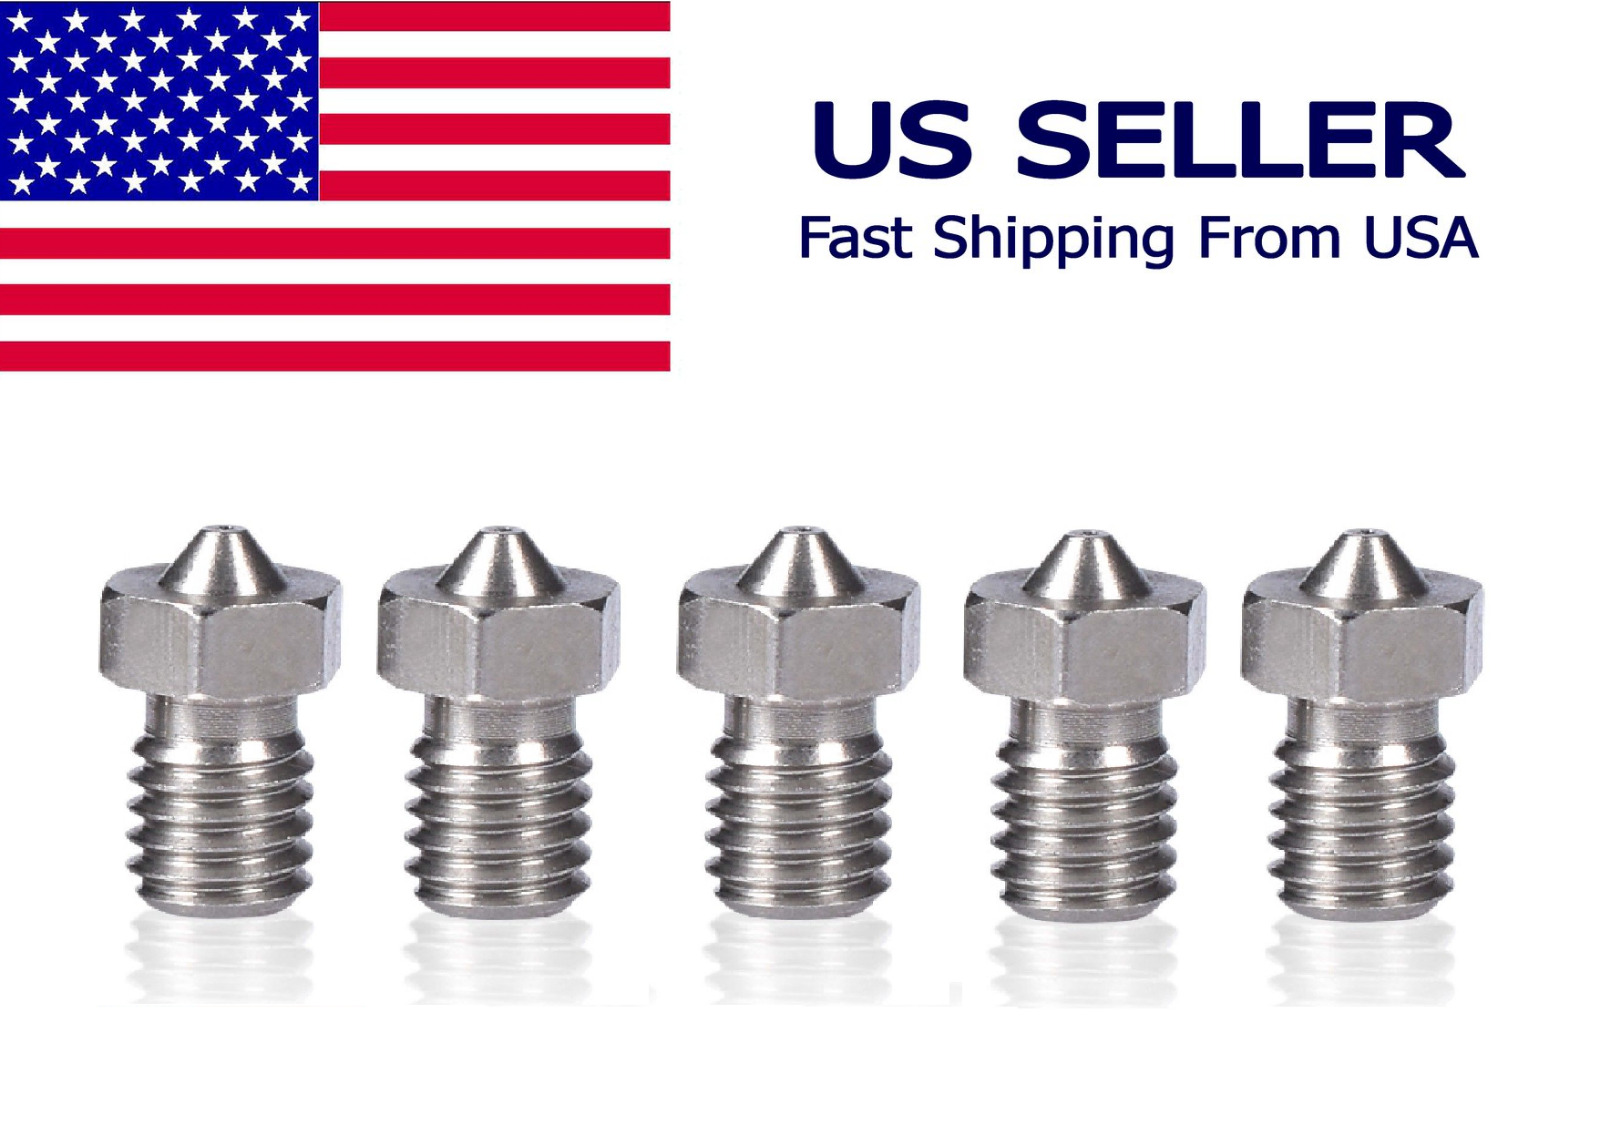 M6 Assorted Stainless Steel Nozzle Extruder Hotend 1.75mm Filament E-3D V5-V6